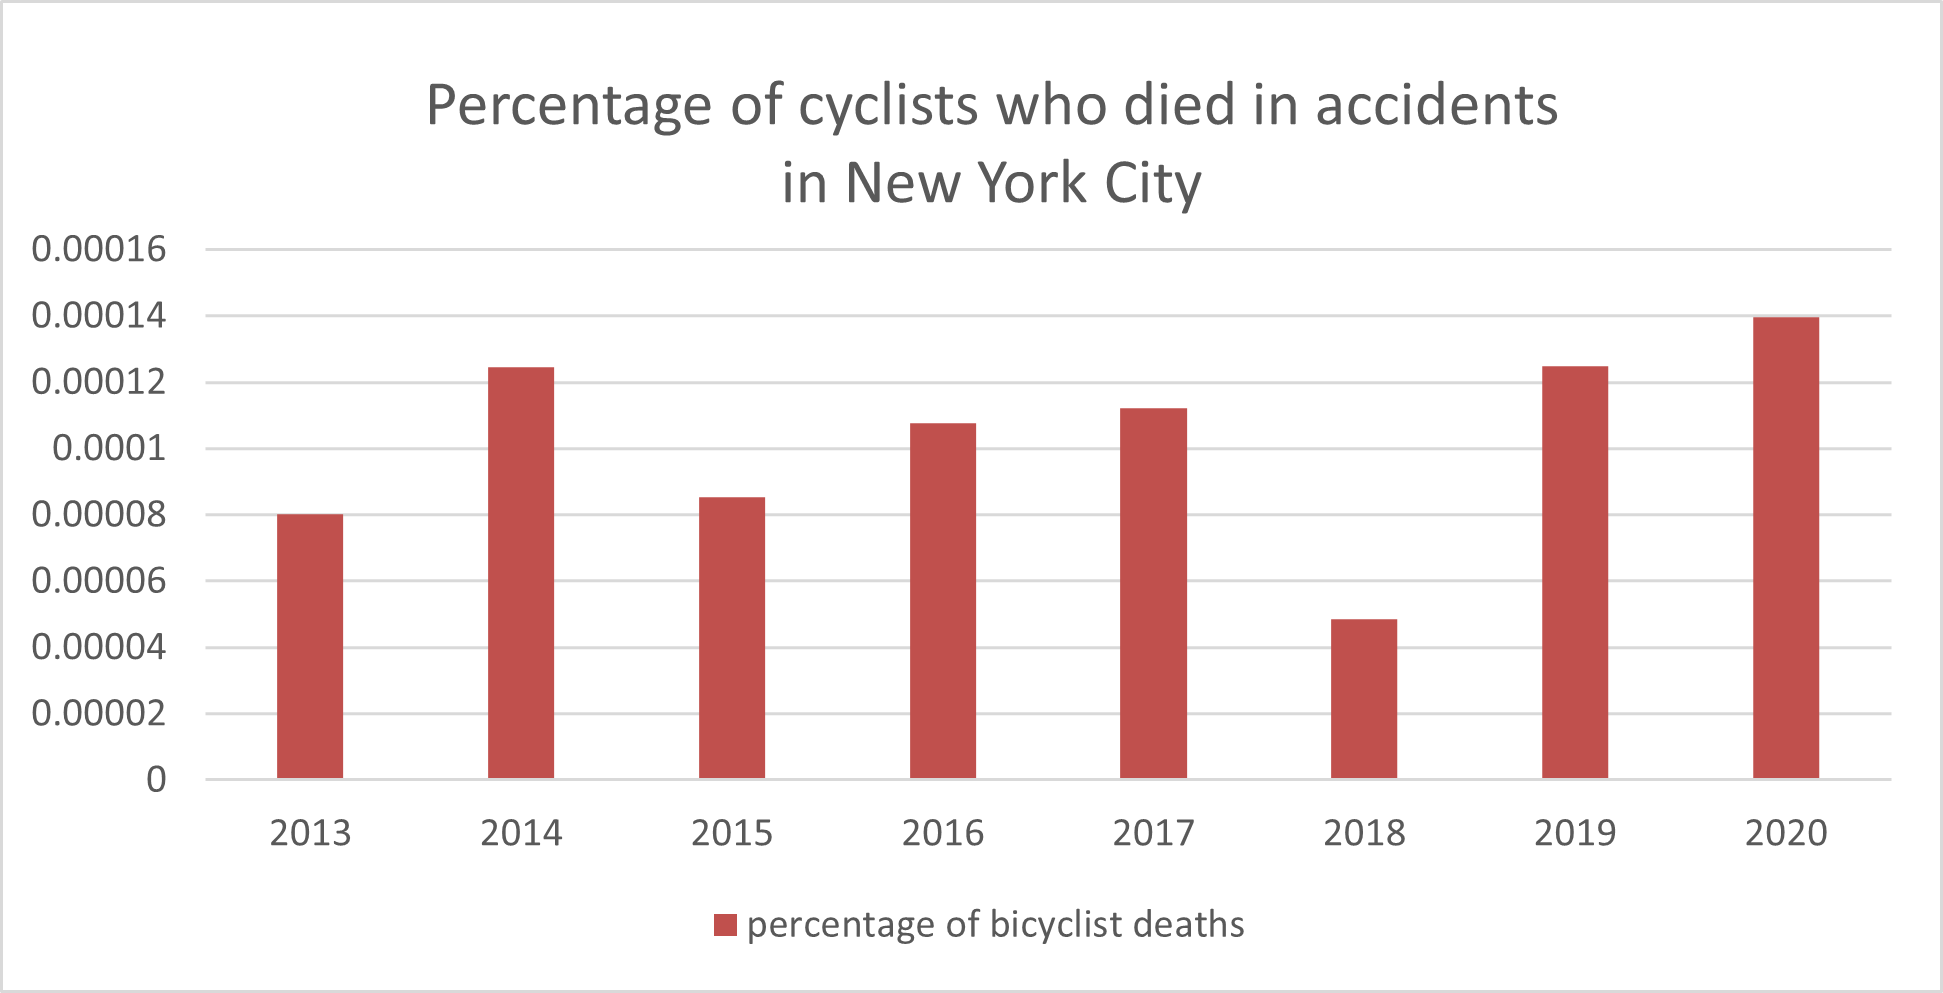 Percentage of cyclists who died in accidents in New York City